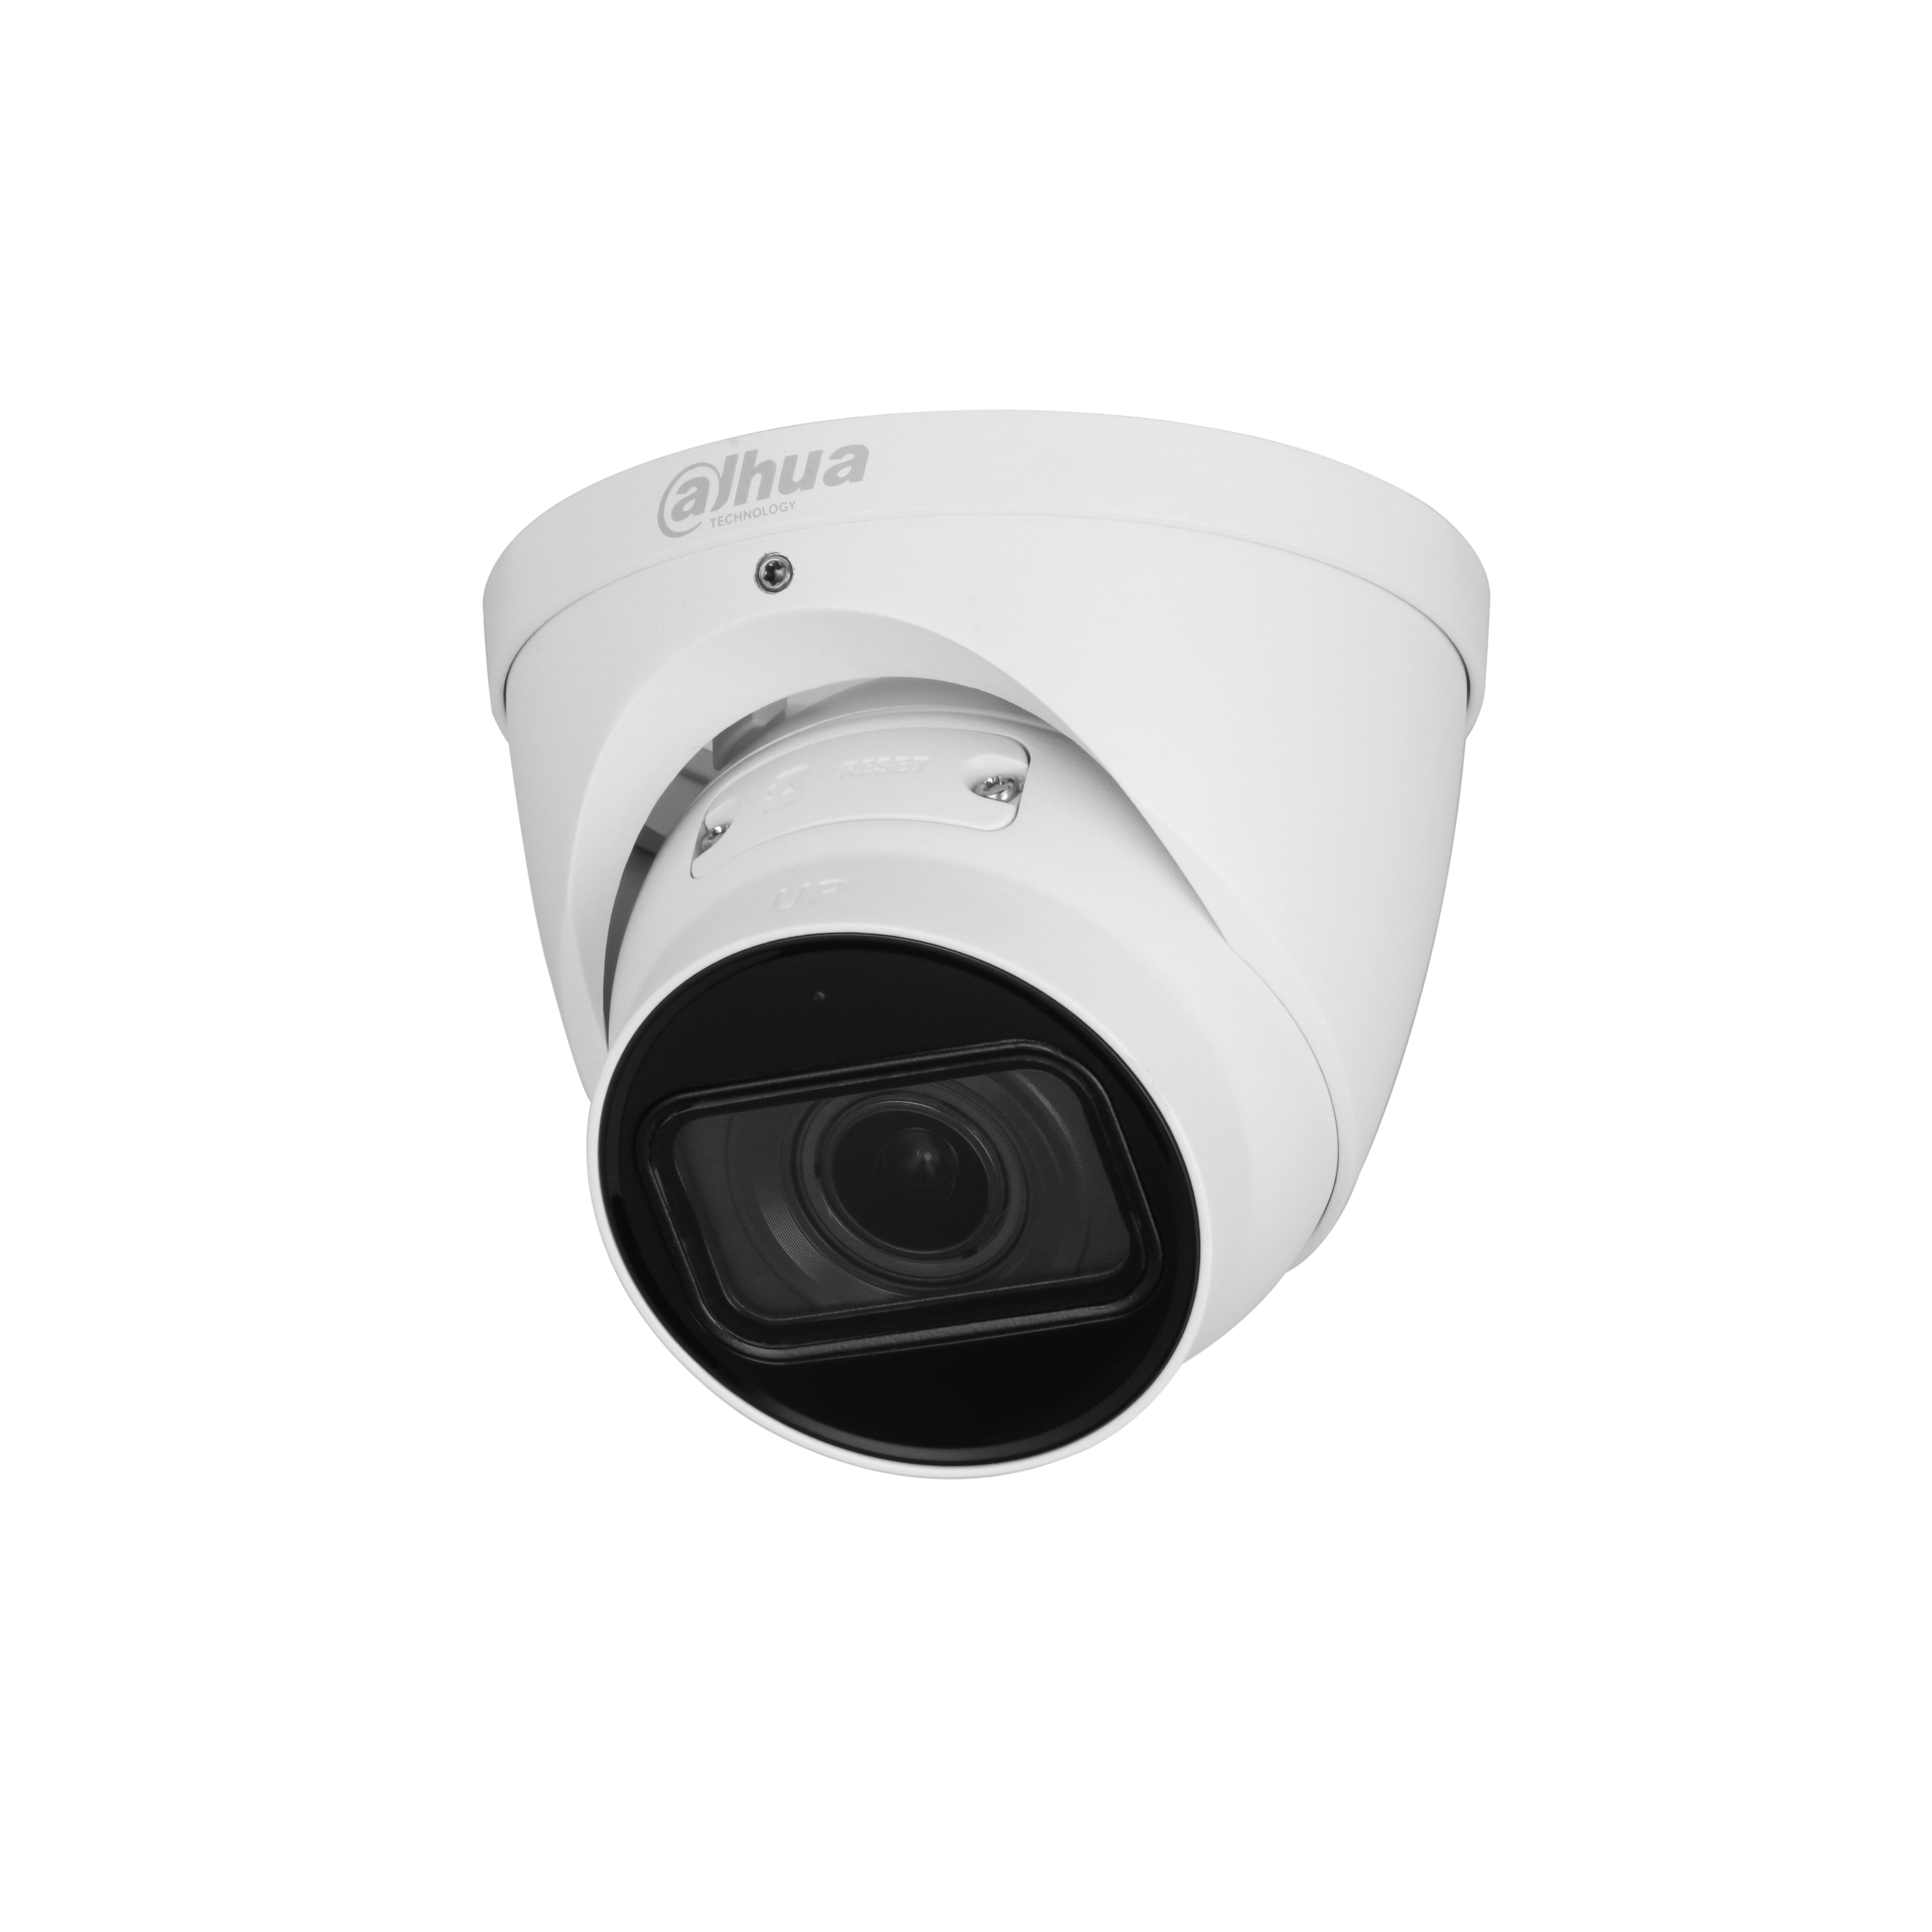 WIZMIND S SERIES IP CAMERA WHITE AI PEOPLE COUNT/ ACUPICK 8MP/4K H.264/4+/5/5+ TURRET 120 WDR METAL 2.7-12MM MOTORISED LENS 4X ZOOM DEEP LIGHT IR 40M EPOE IP67 BUILT IN MIC SUPPORT UP TO 512GB SD 12VDC